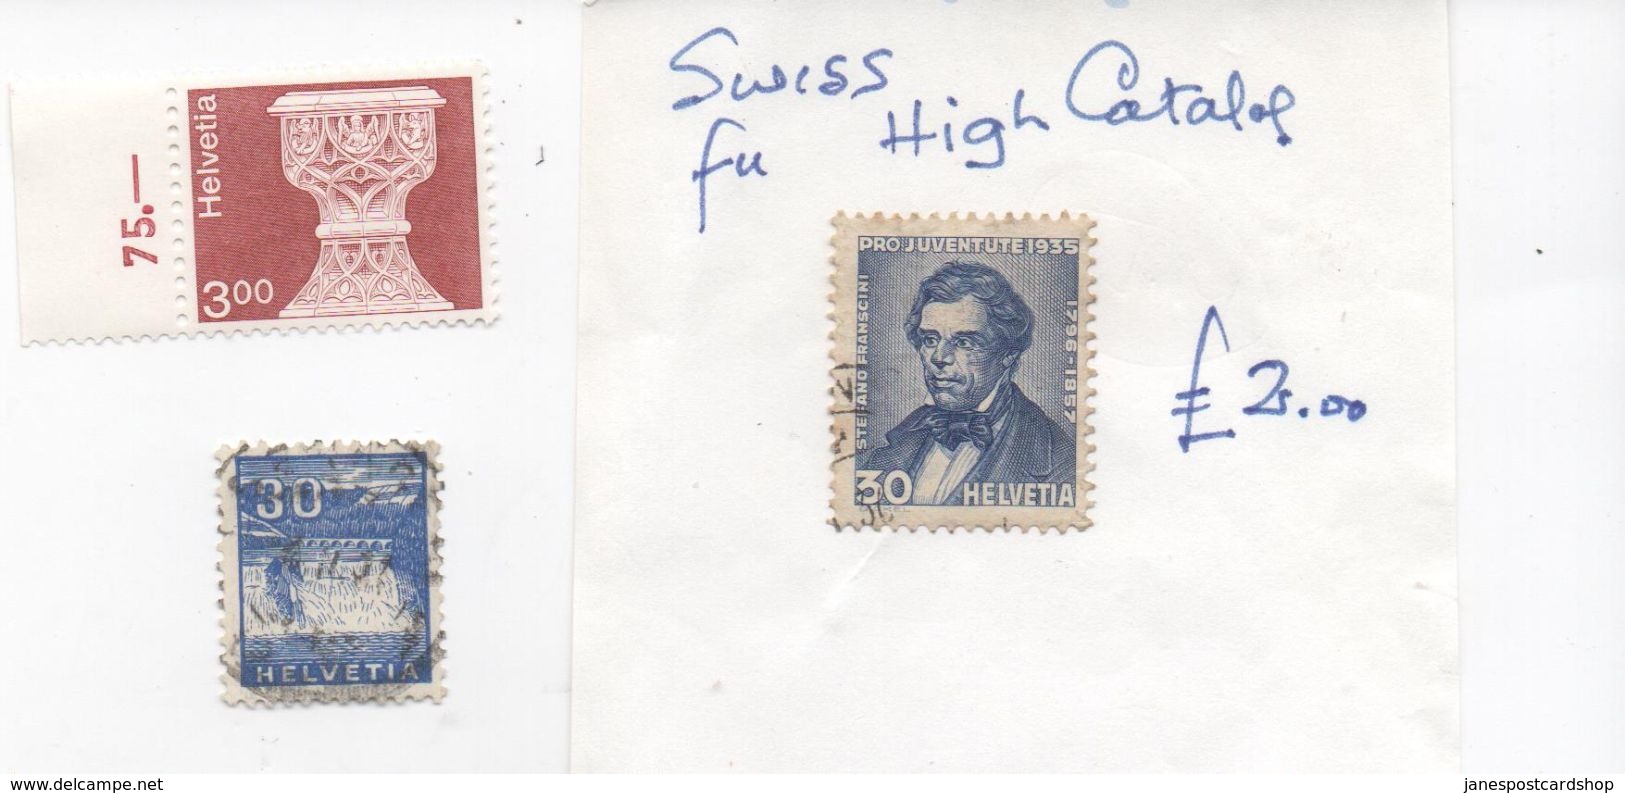 THREE SWISS STAMPS - ONE MINT - ONE HIGH CATALOGUE - Collections